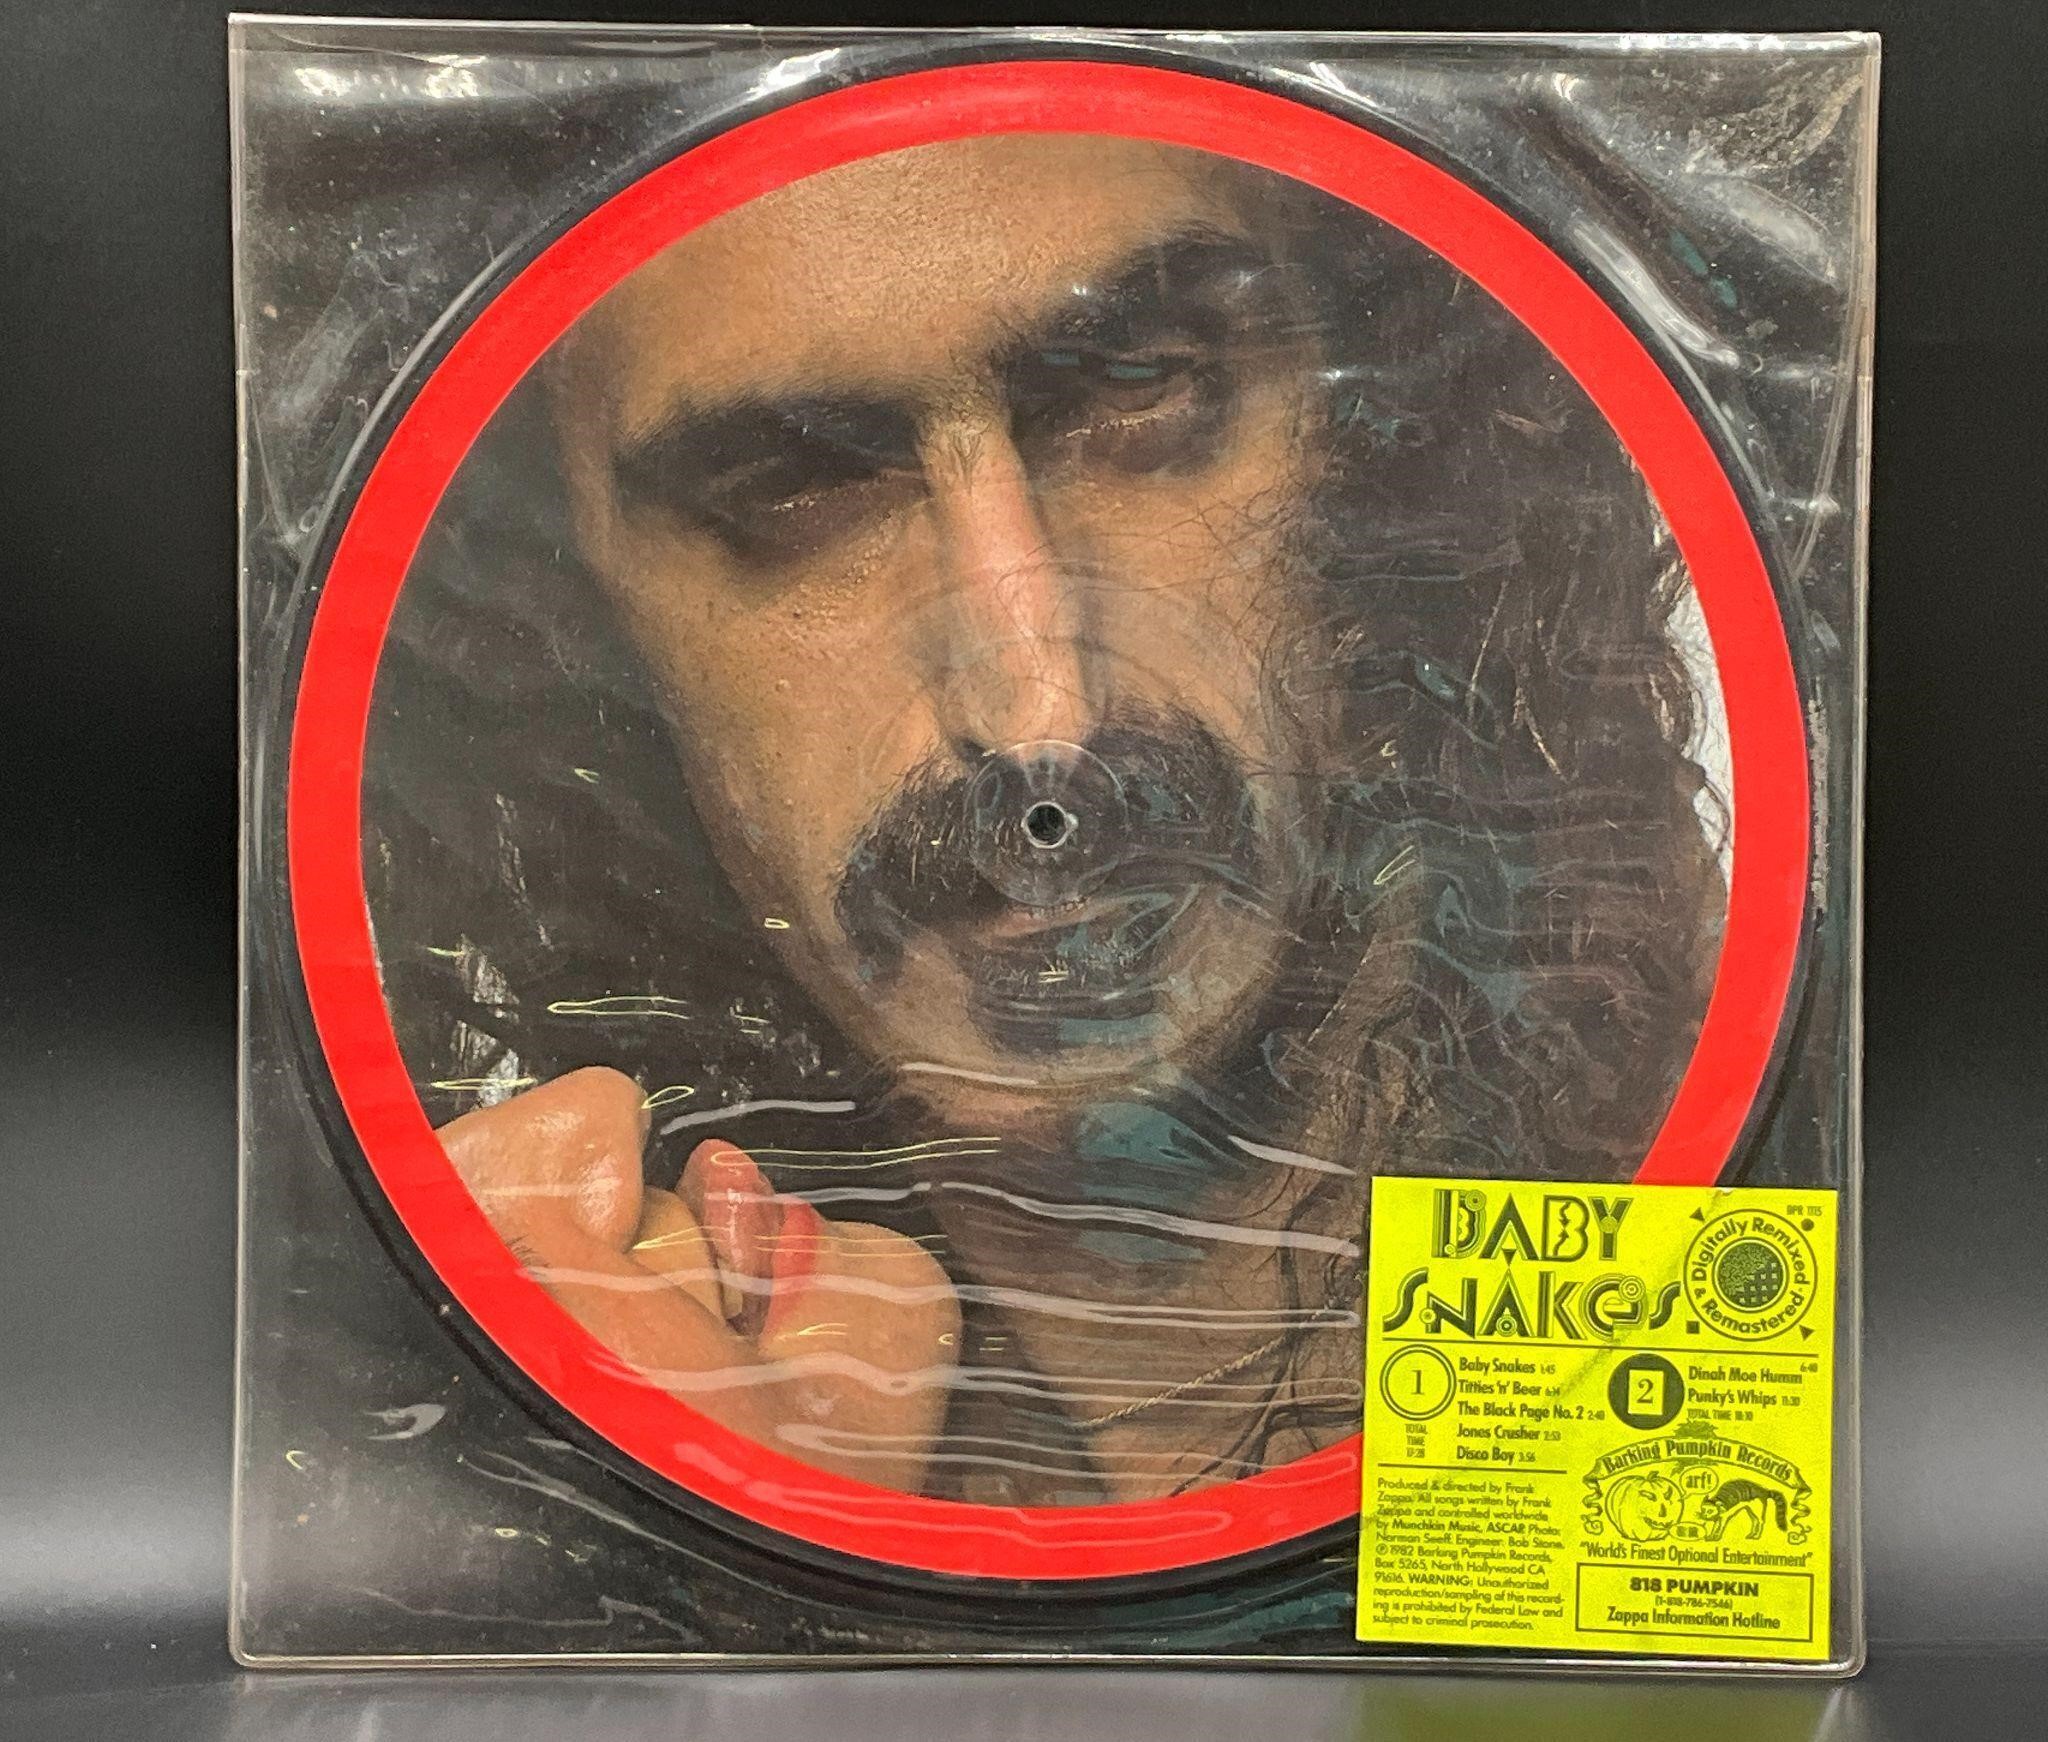 1986 Frank Zappa "Baby Snakes" Picture Disc LP